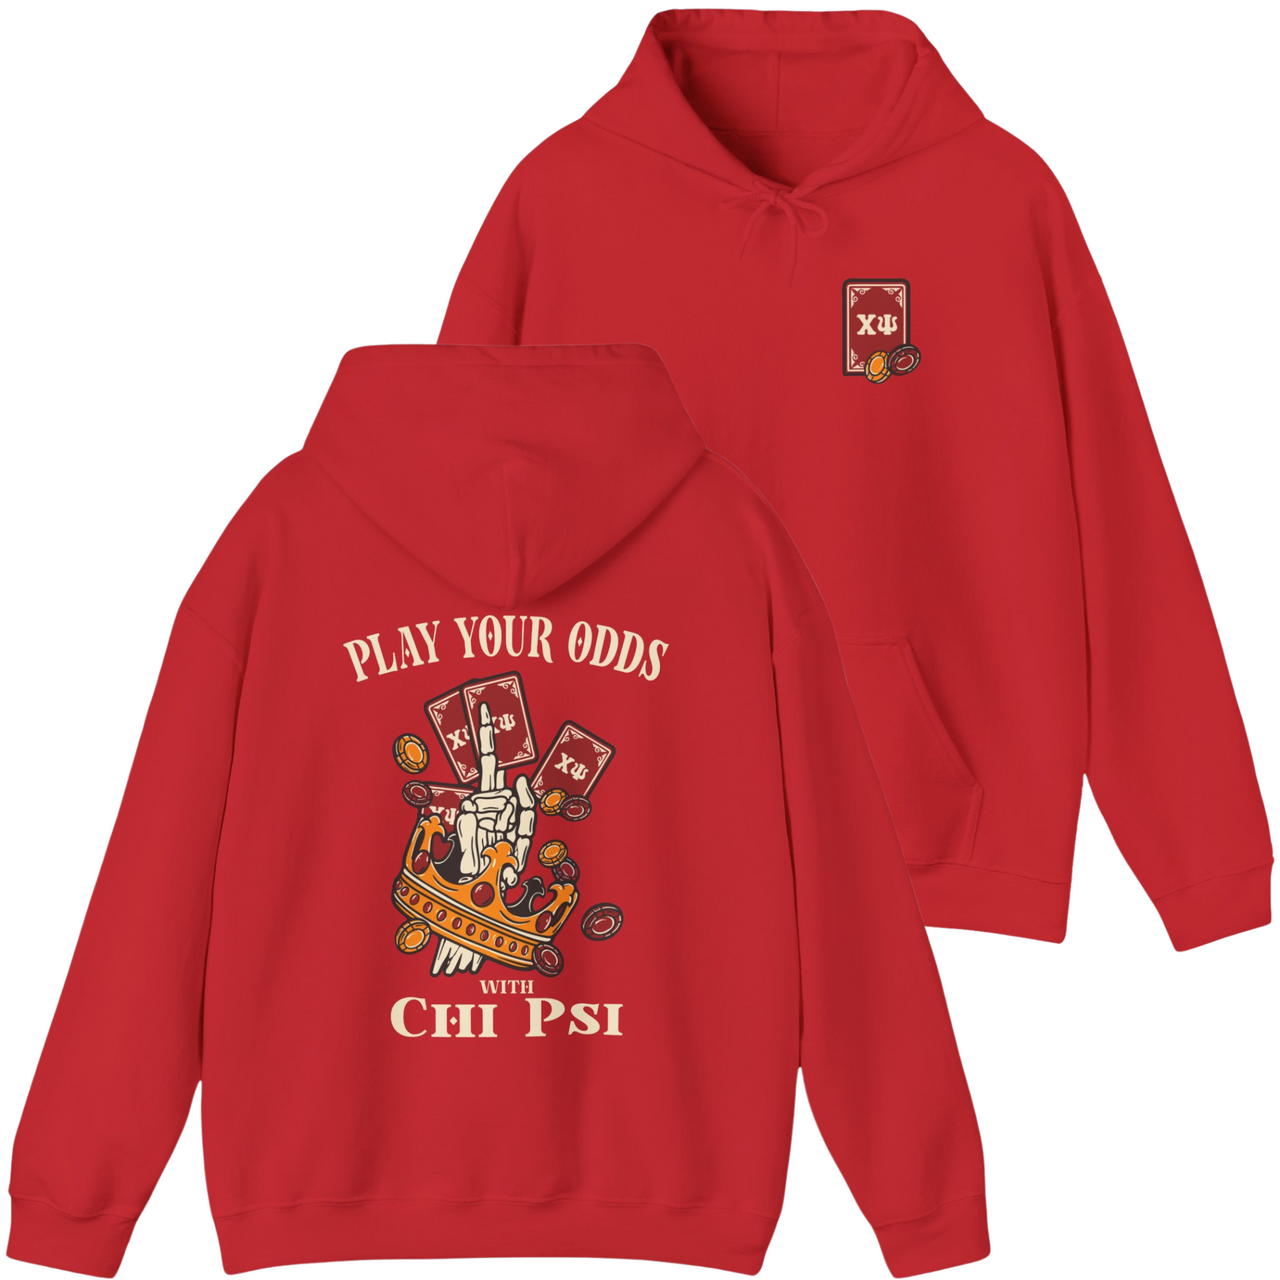 Chi Psi Graphic Hoodie | Play Your Odds